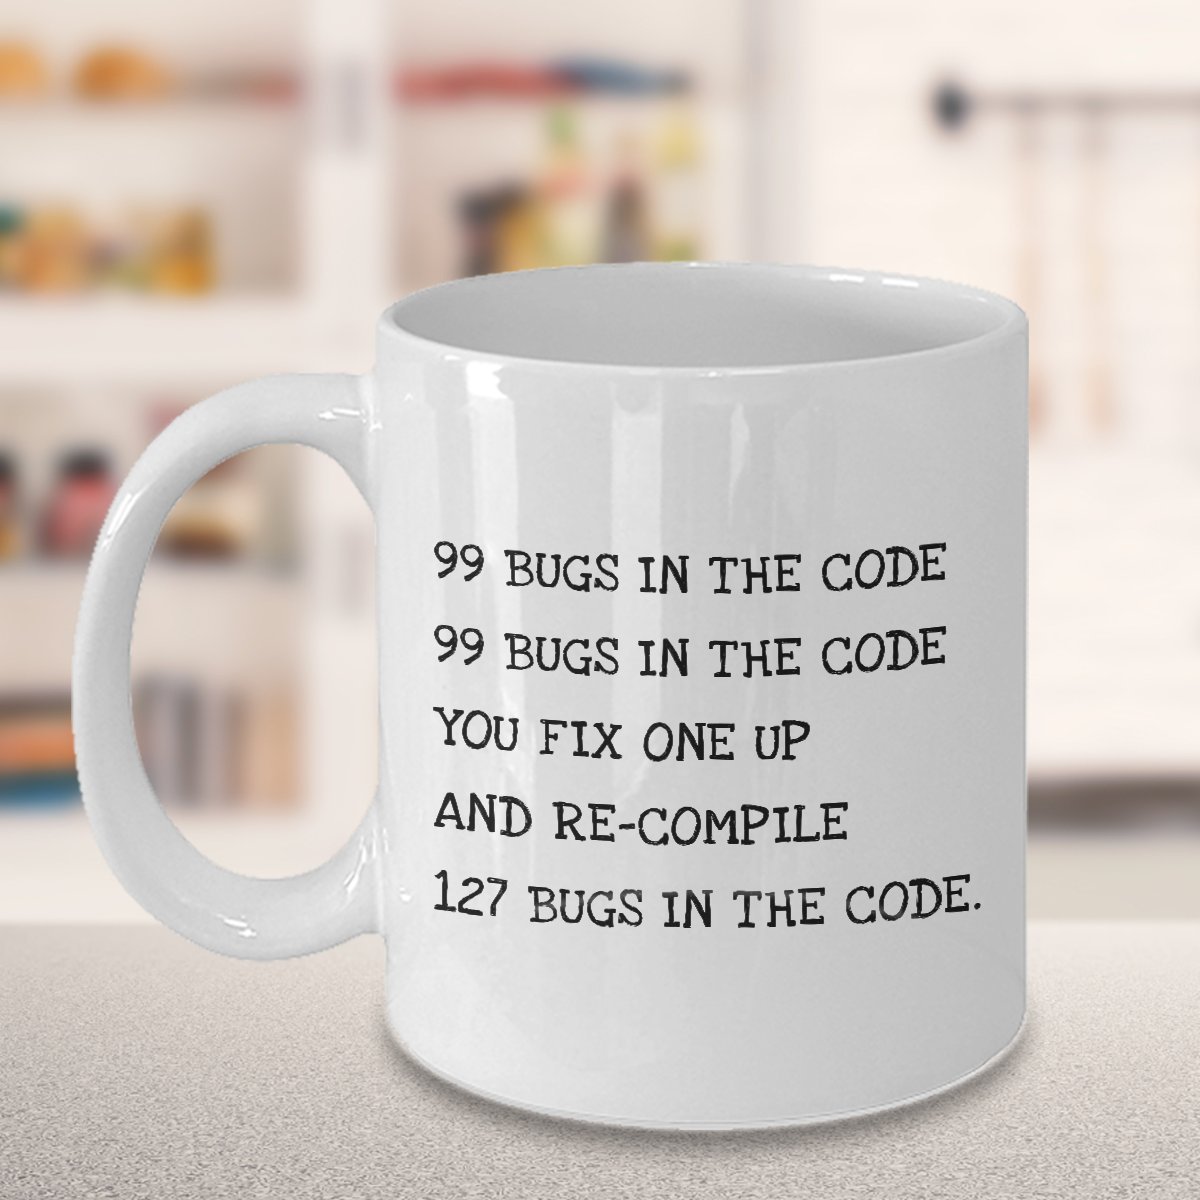 A great coffee mug for the developer in your life